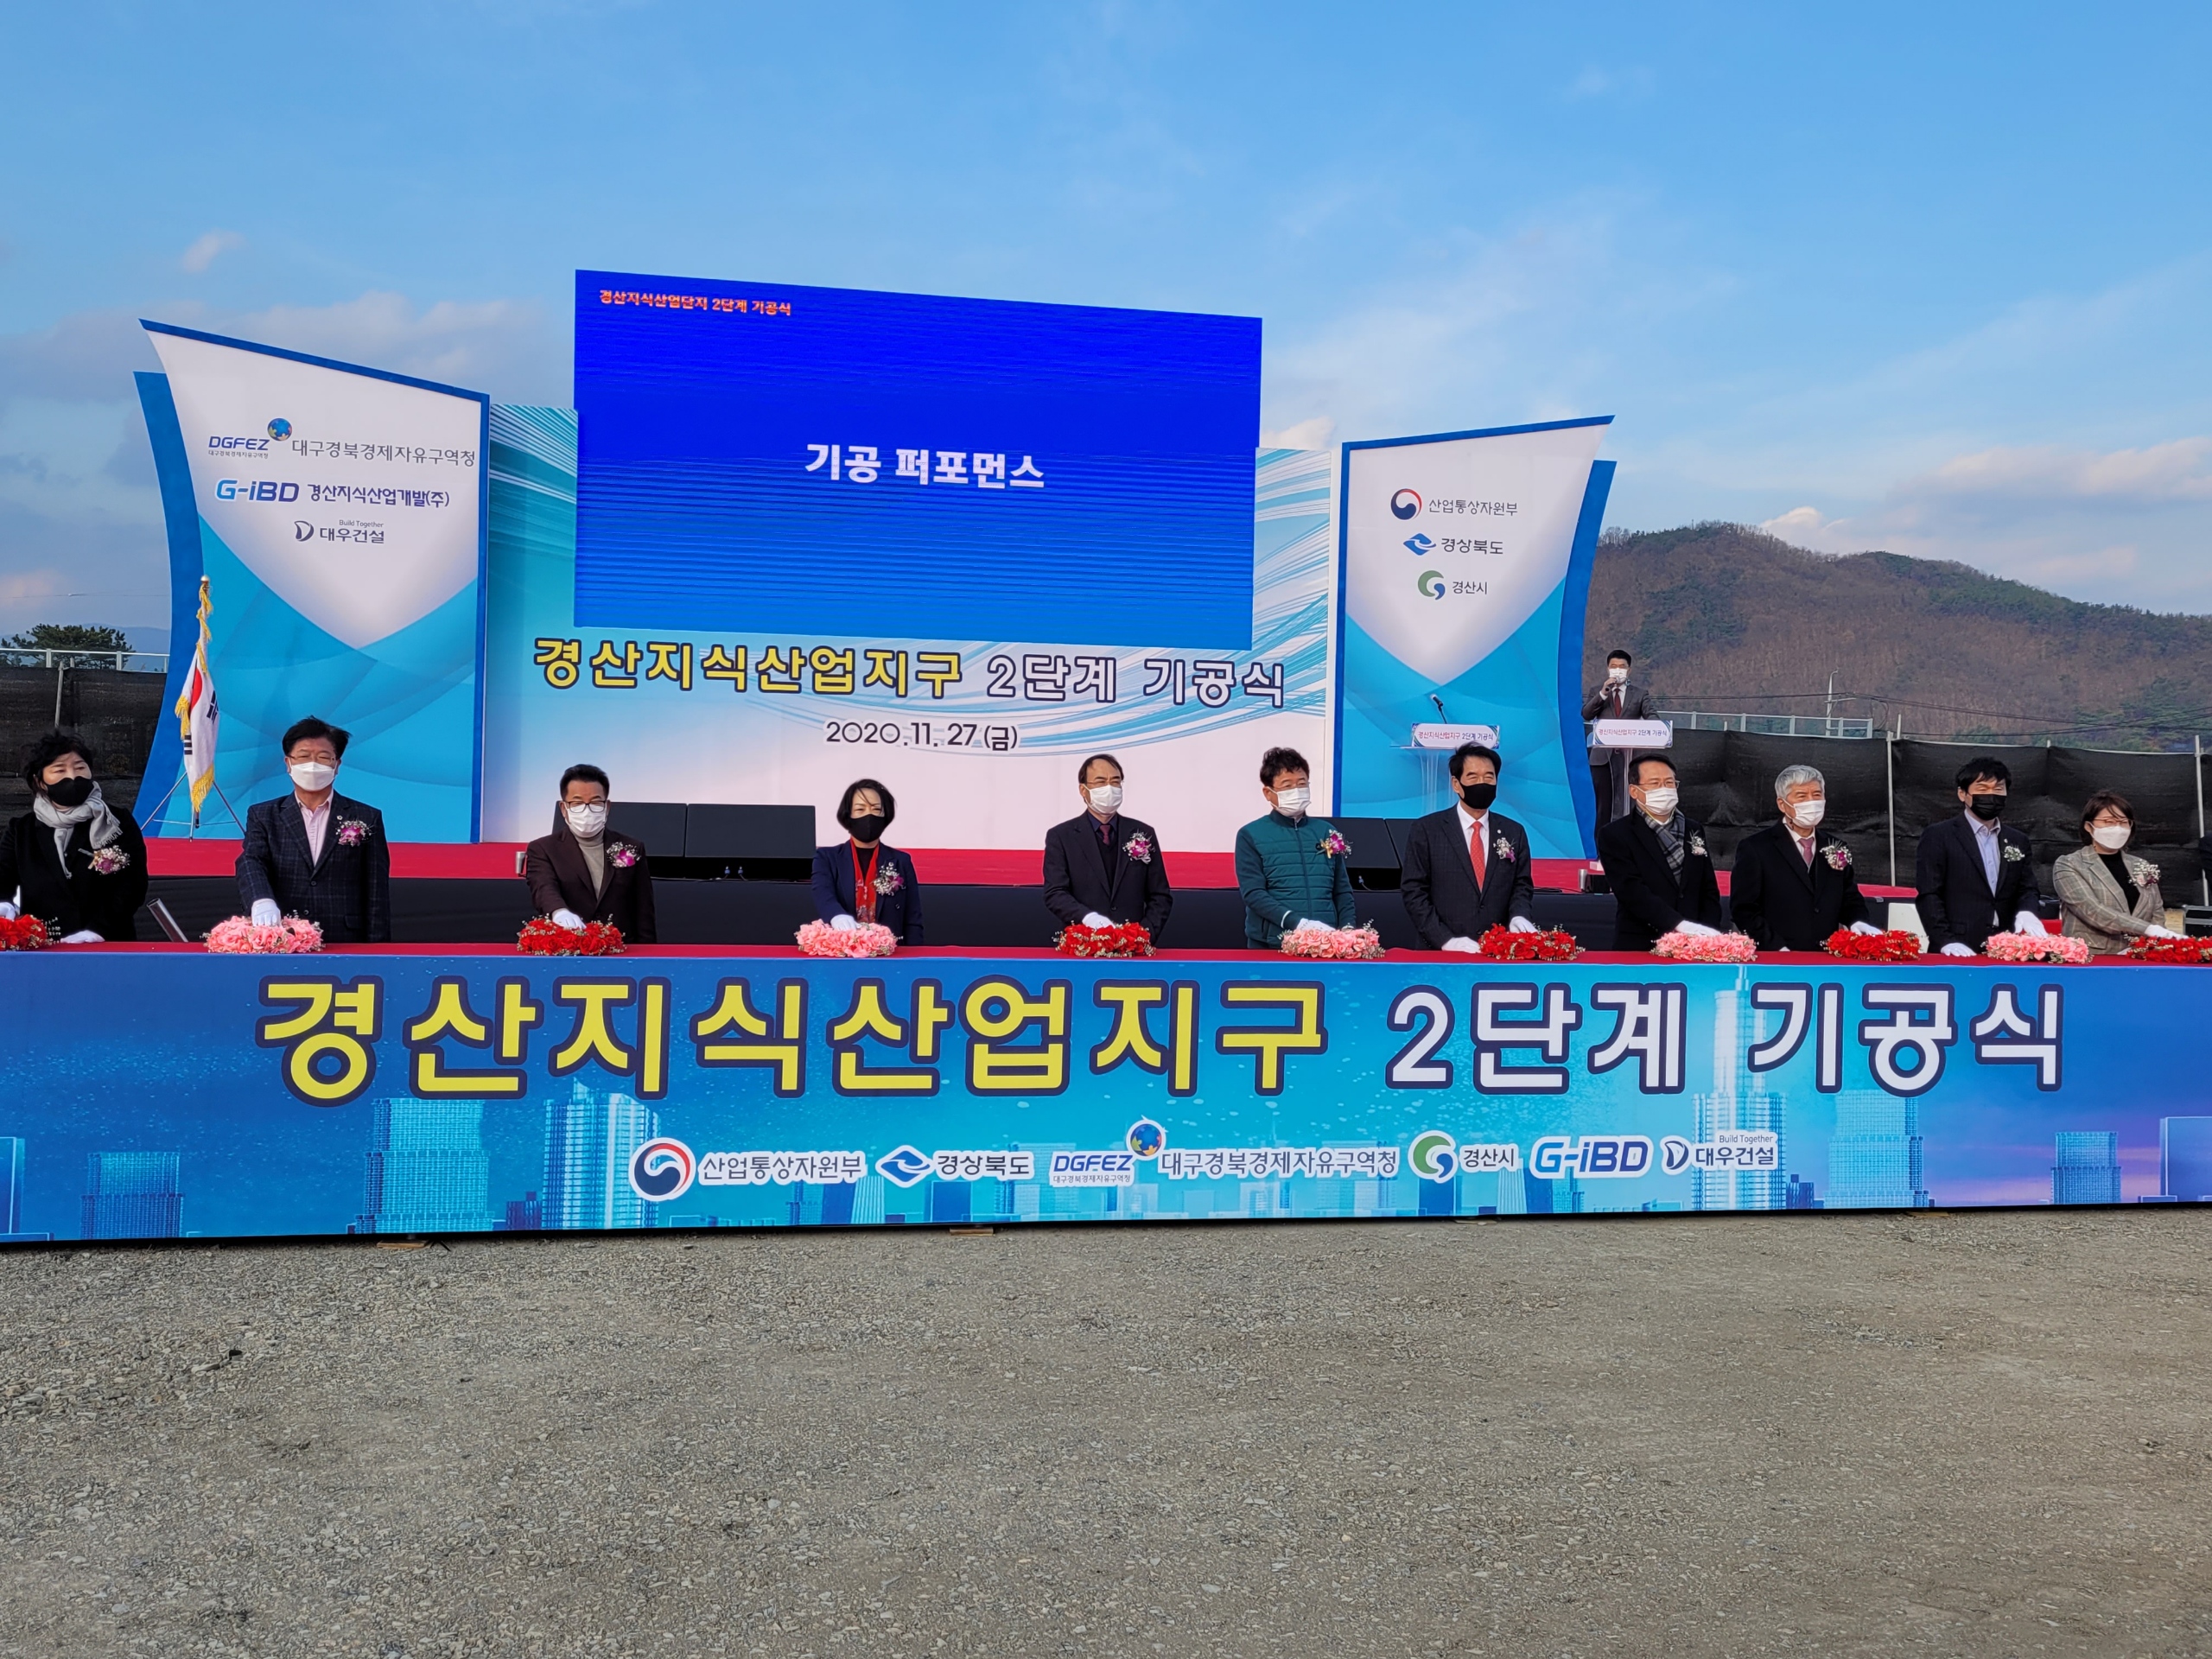 Gyeongsan Knowledge Industry District Launched the 2nd Phase...